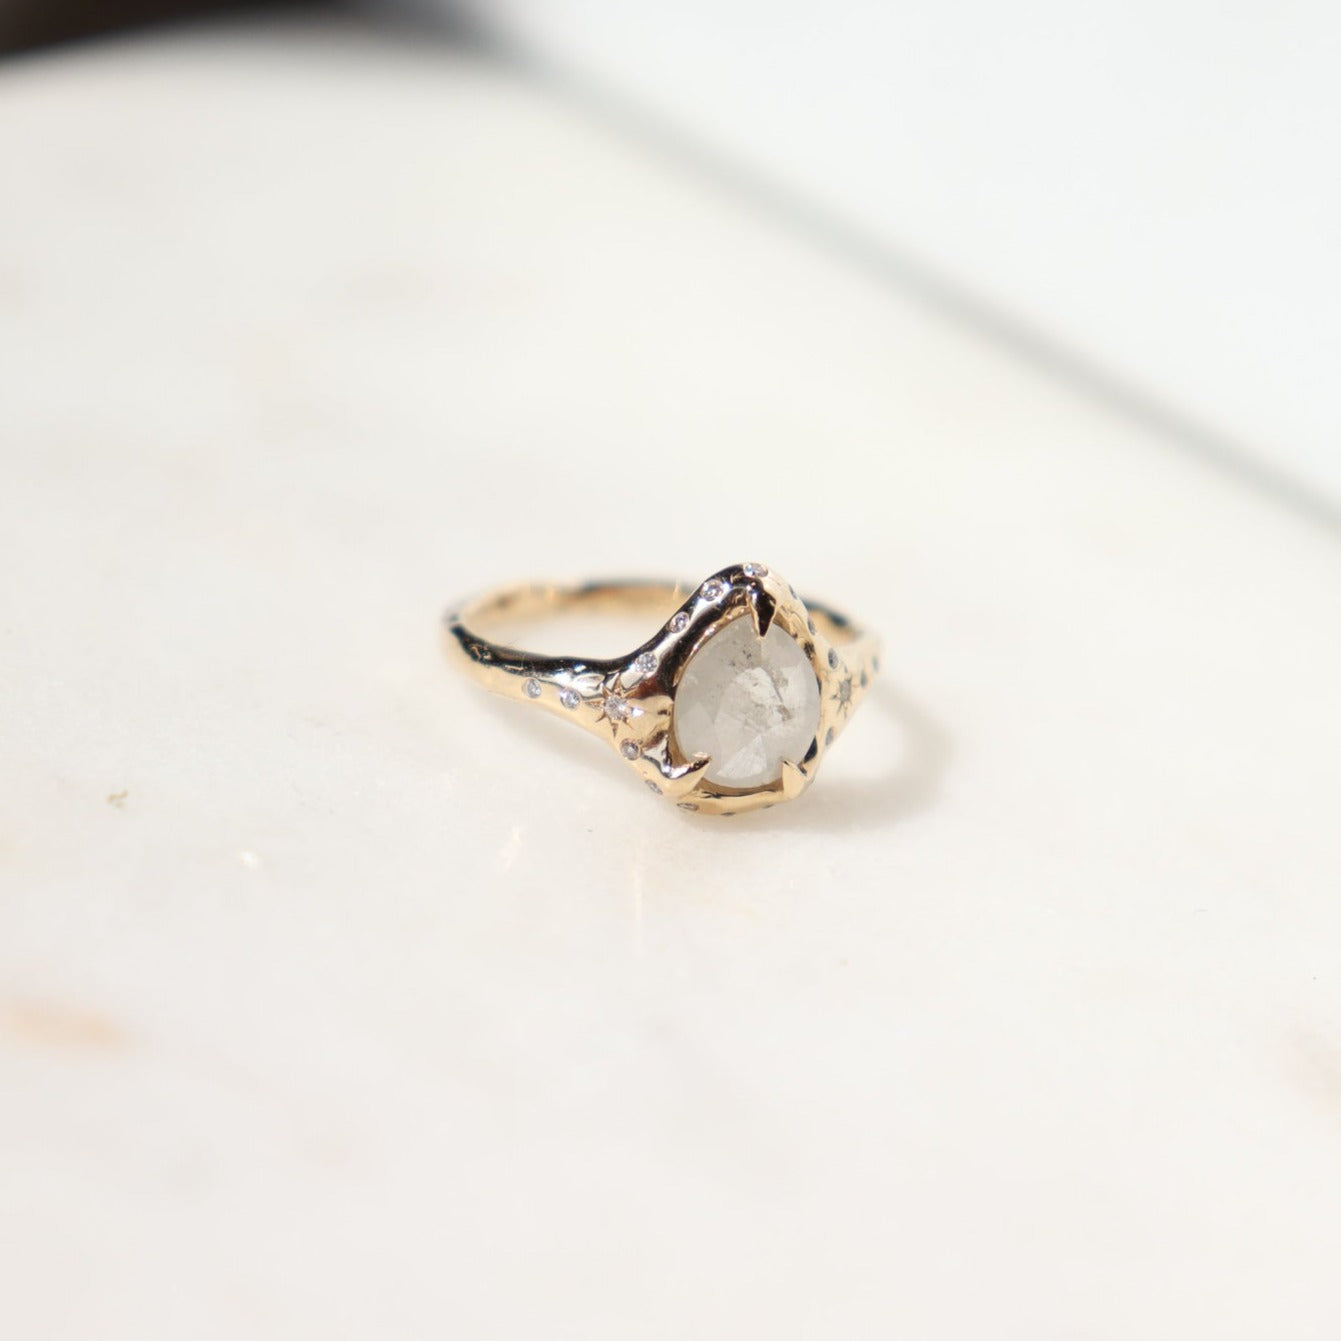 3/4 view of a white icy diamond ring that sits on a white surface